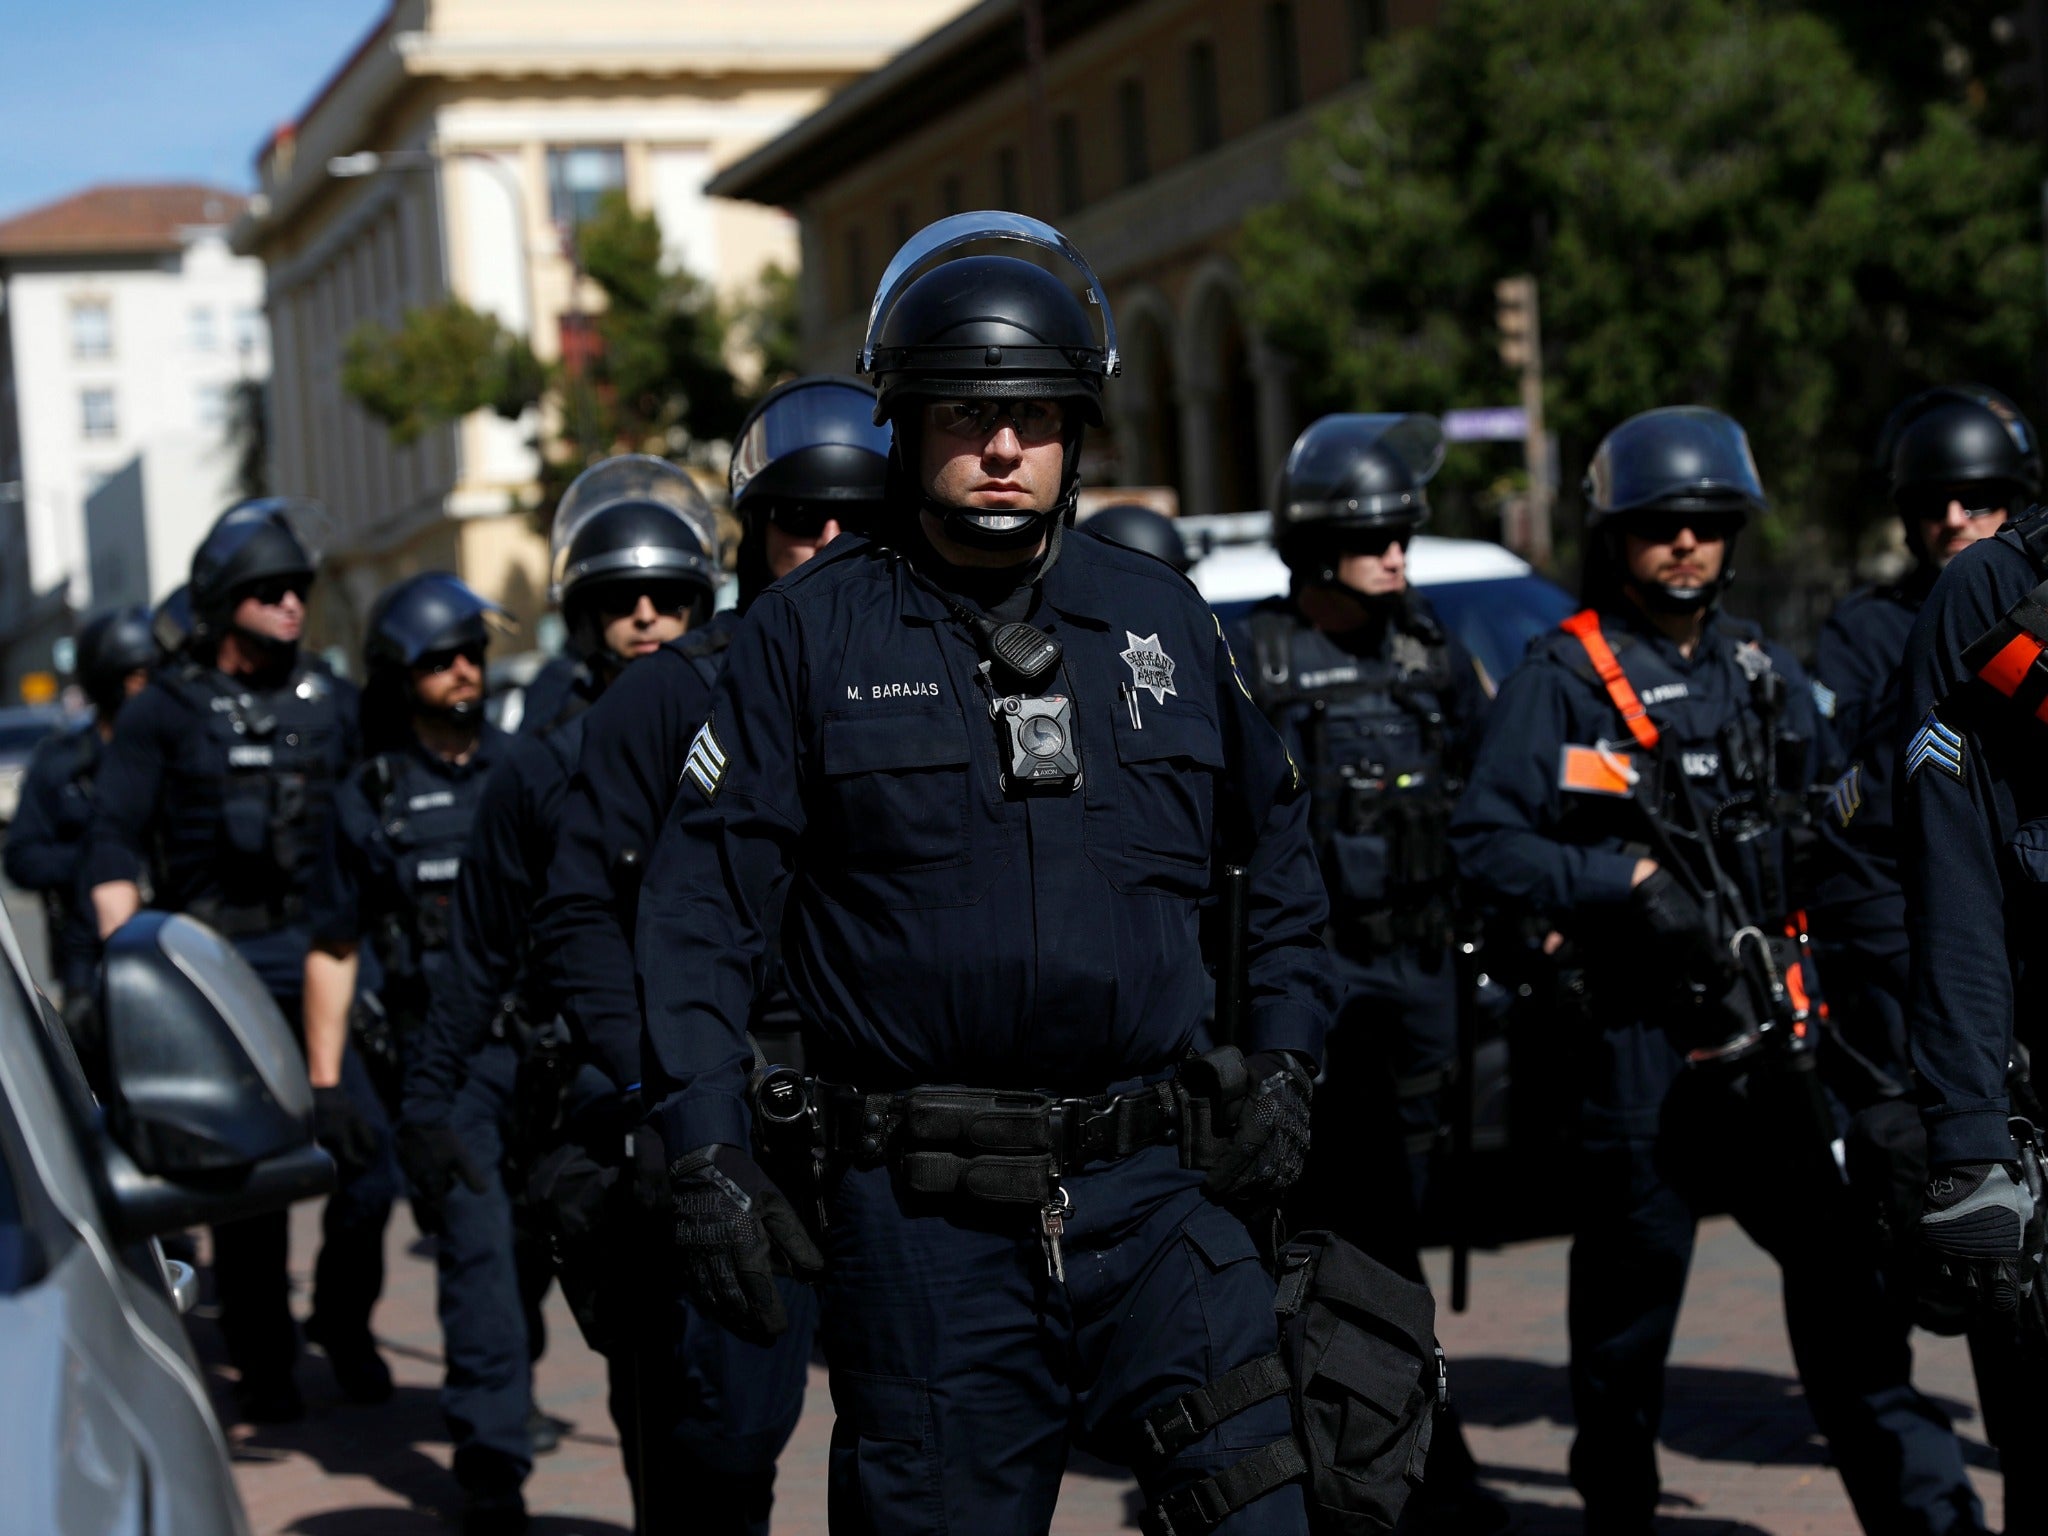 Police officers at protests over the cancellation of conservative provocateur Ann Coulter's speech in Berkeley. Police officials are bracing for violence at a 'No to Marxism in America' rally over the coming weekend.